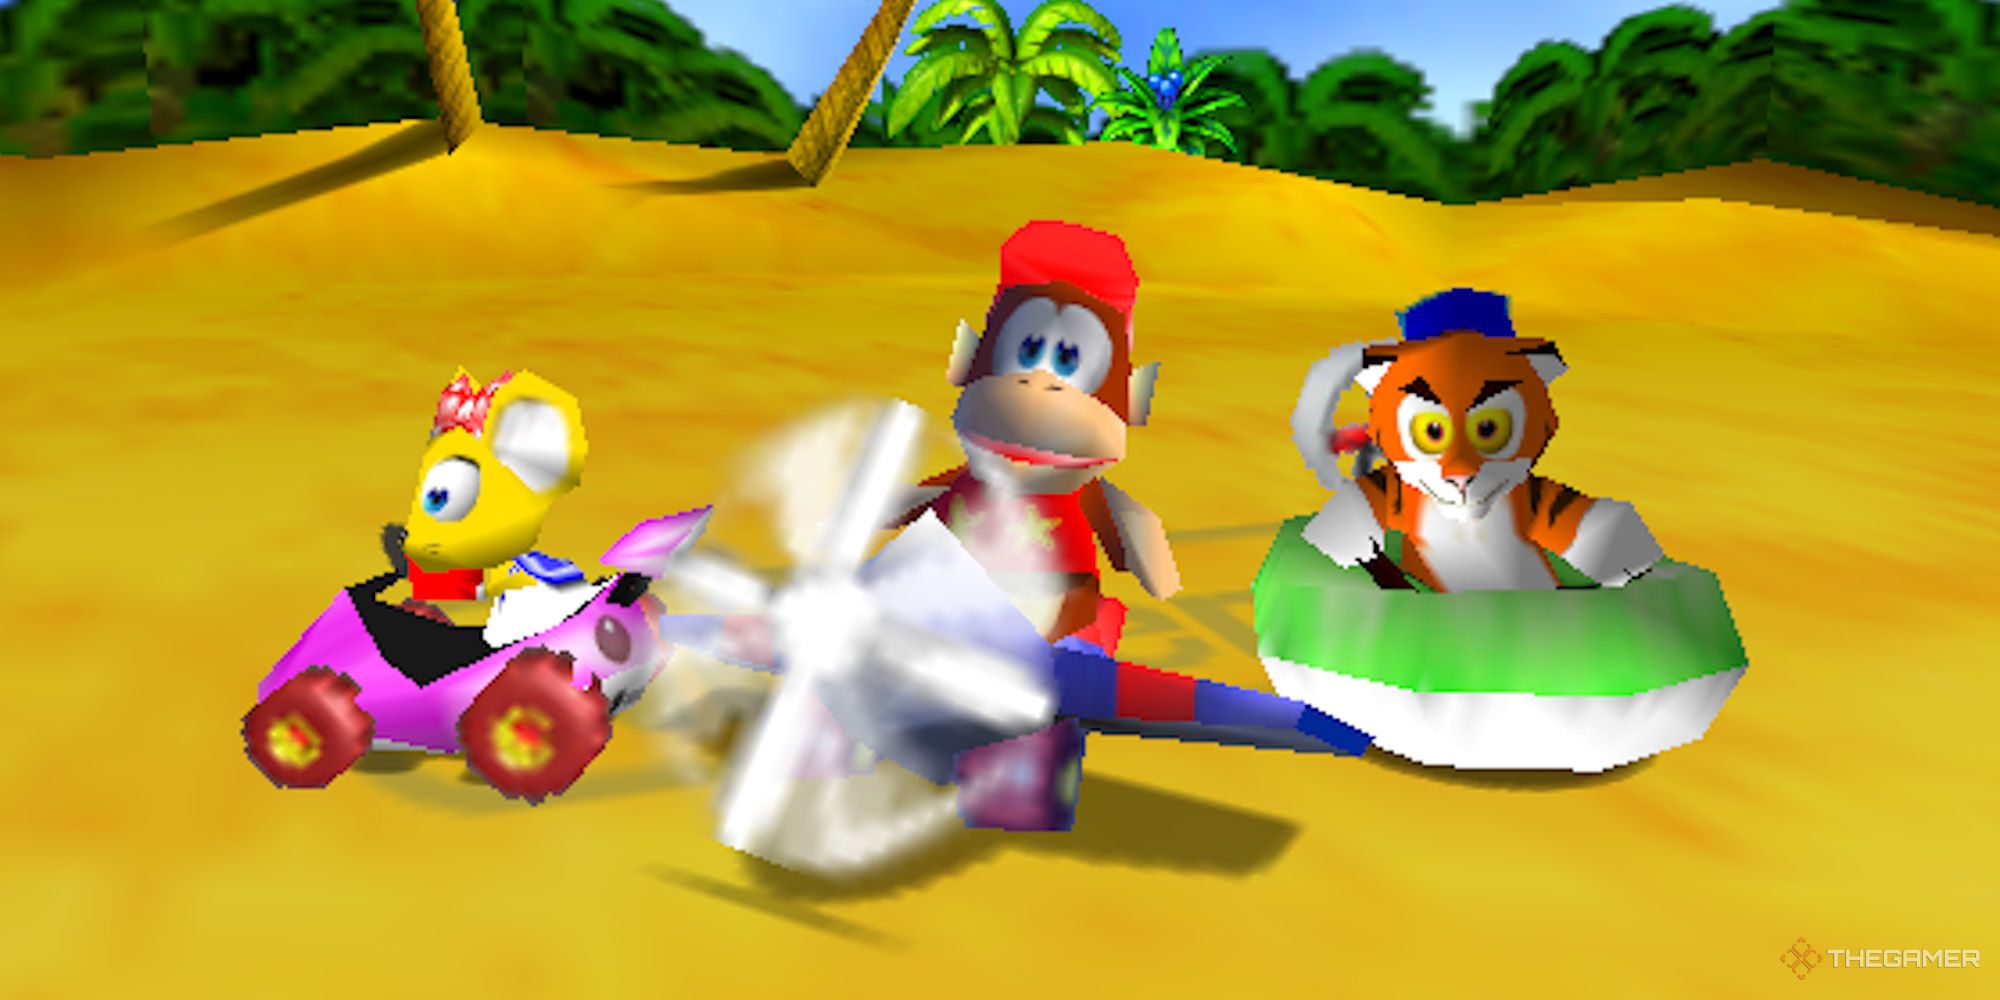 Diddy Kong Racing - Diddy, Timber, and Pipsy in their vehicles